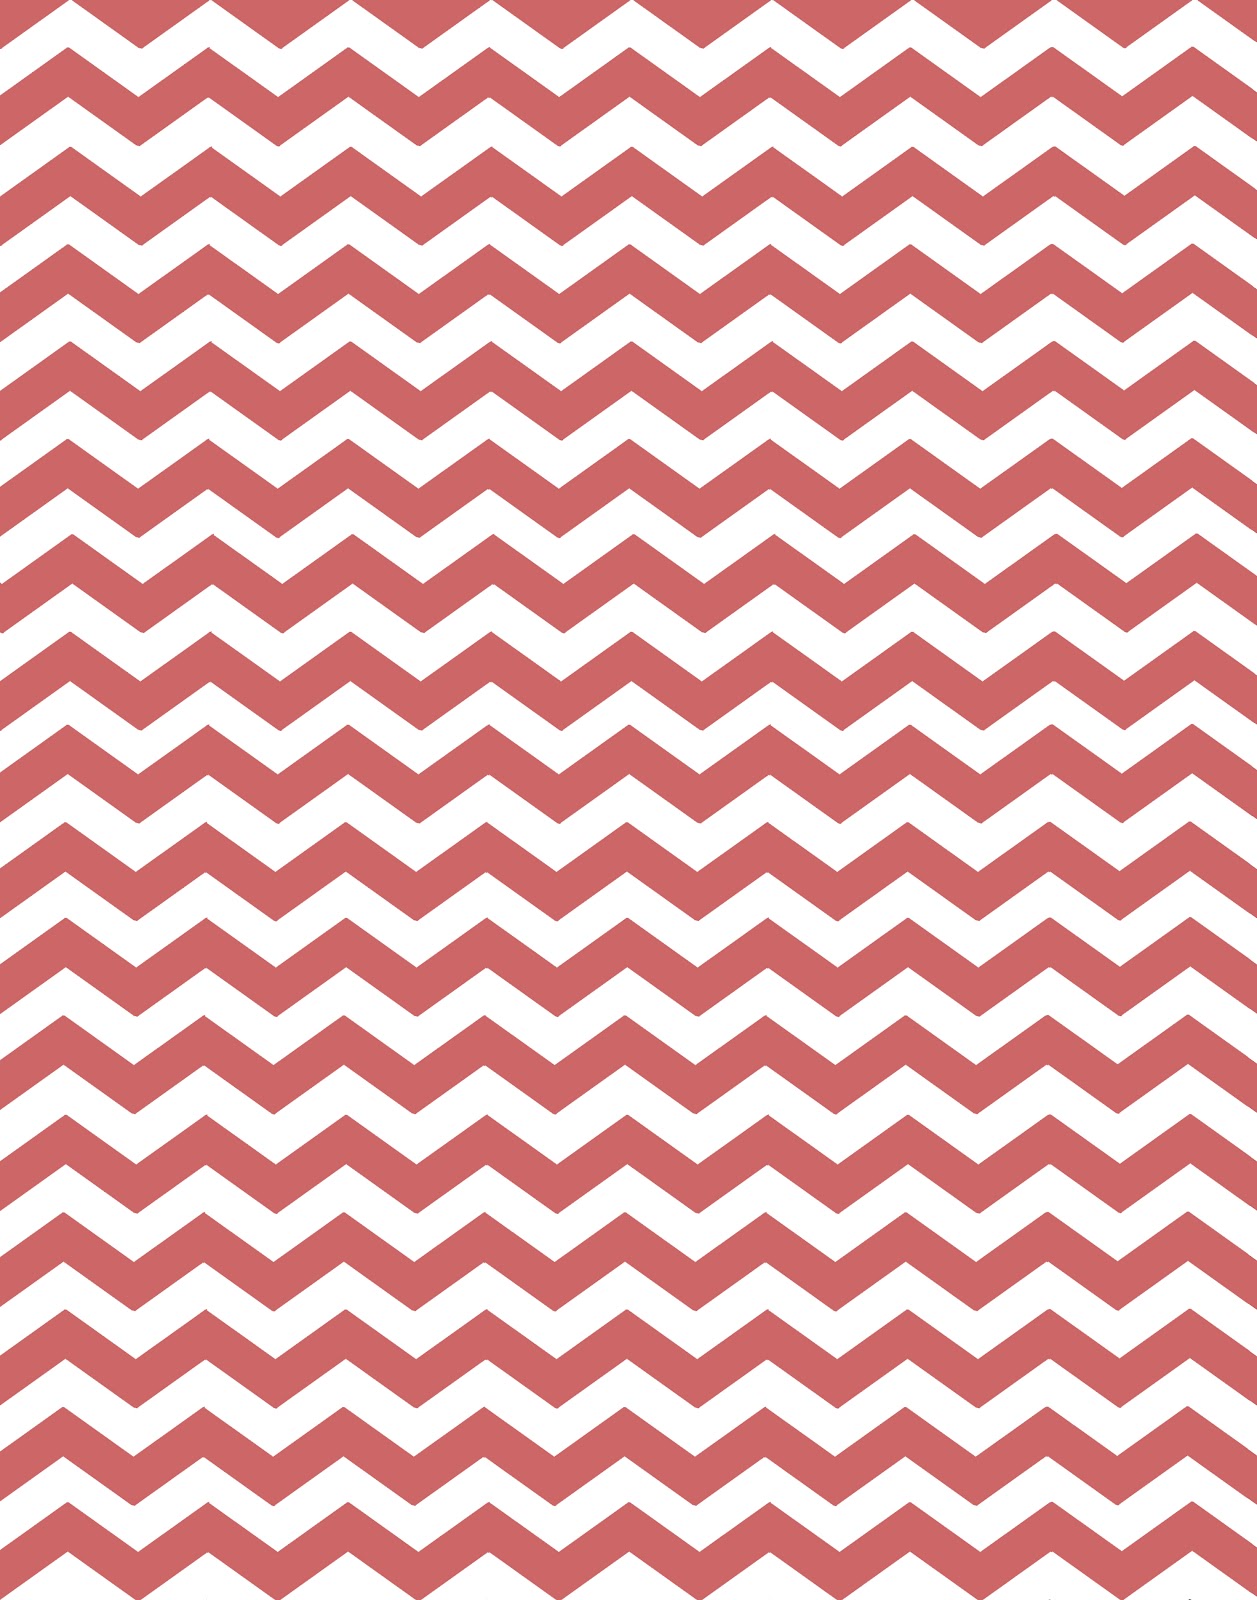 Coral And Turquoise Chevron Wallpaper - Rose Gold Chevron Backgrounds - HD Wallpaper 